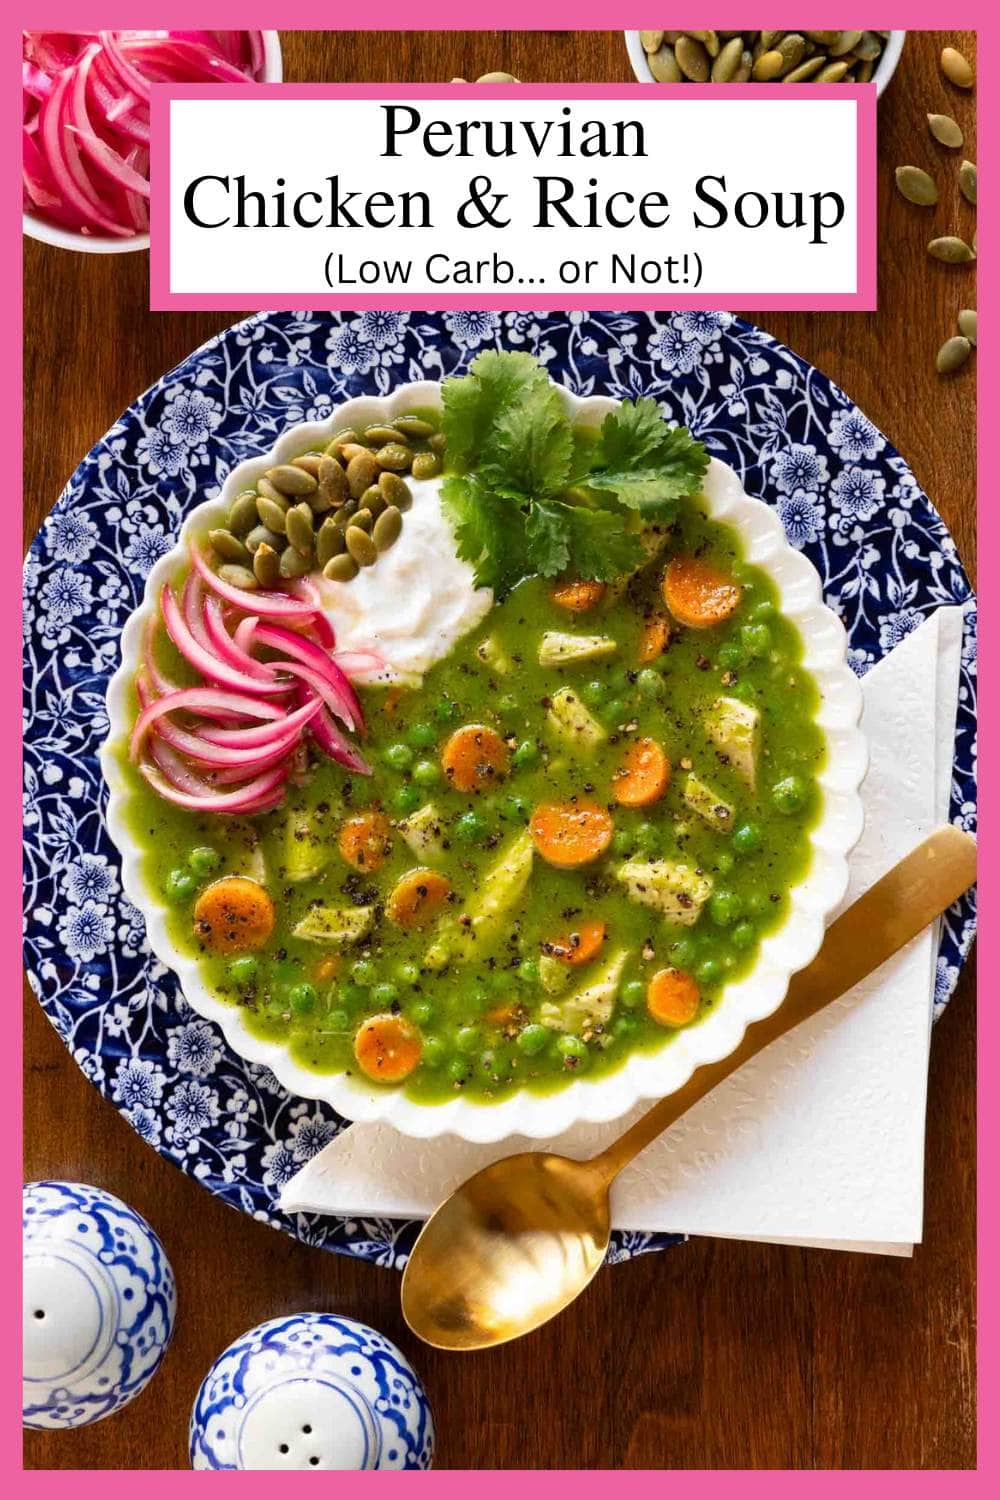 Peruvian Chicken and Rice Soup (Low Carb... or Not!)